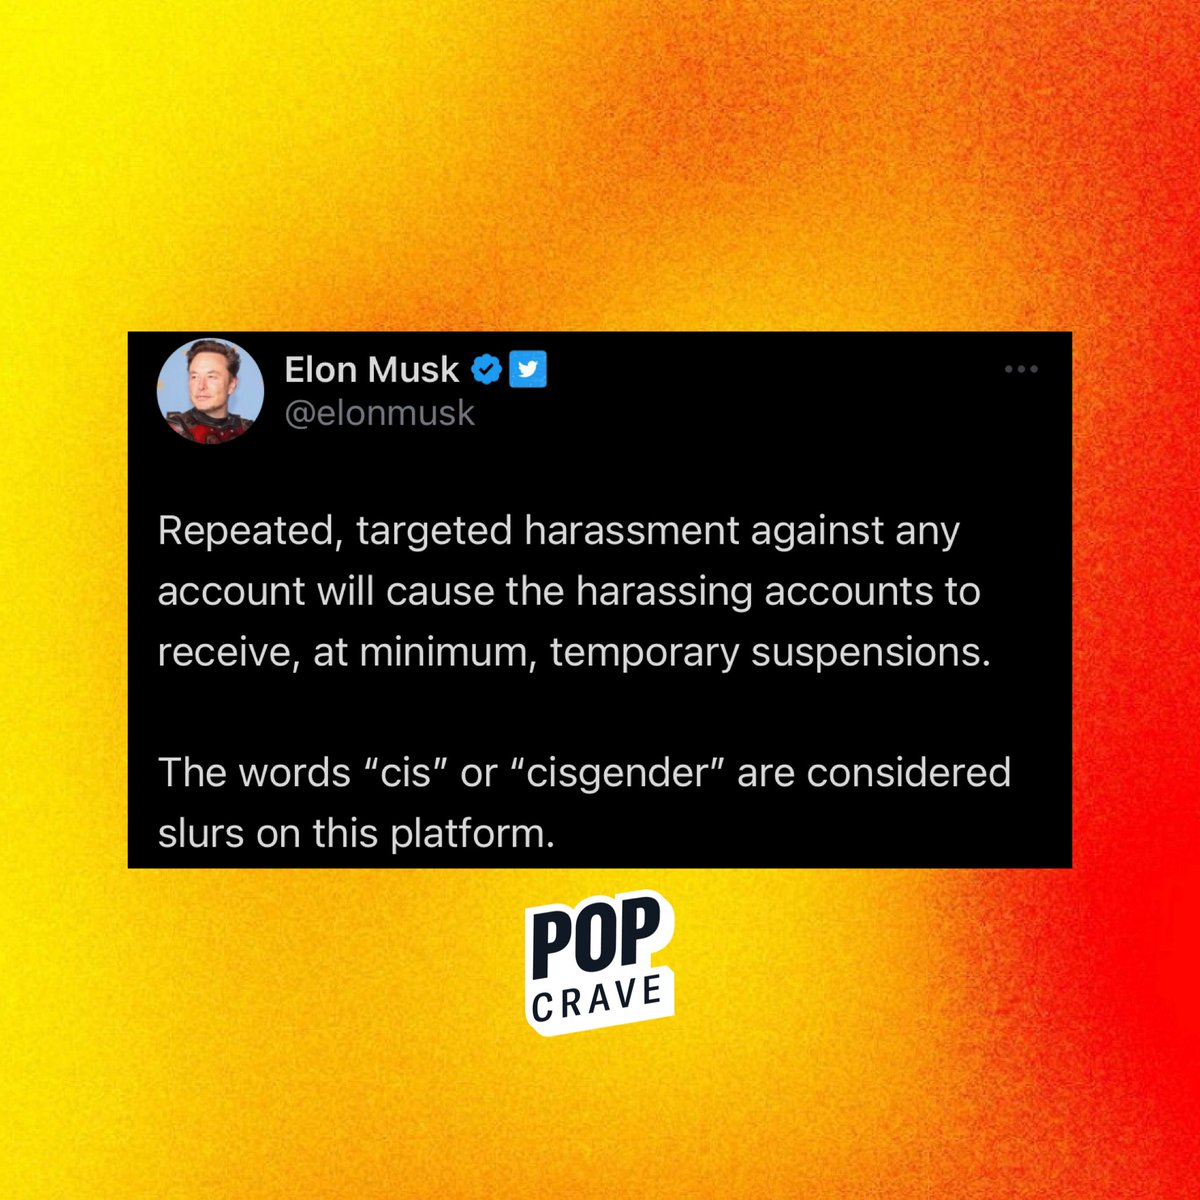 Elon Musk says that “cis” and “cisgender” are considered slurs on Twitter. 

The term is defined in most major dictionaries, including the Oxford English Dictionary, which added it in 2015.